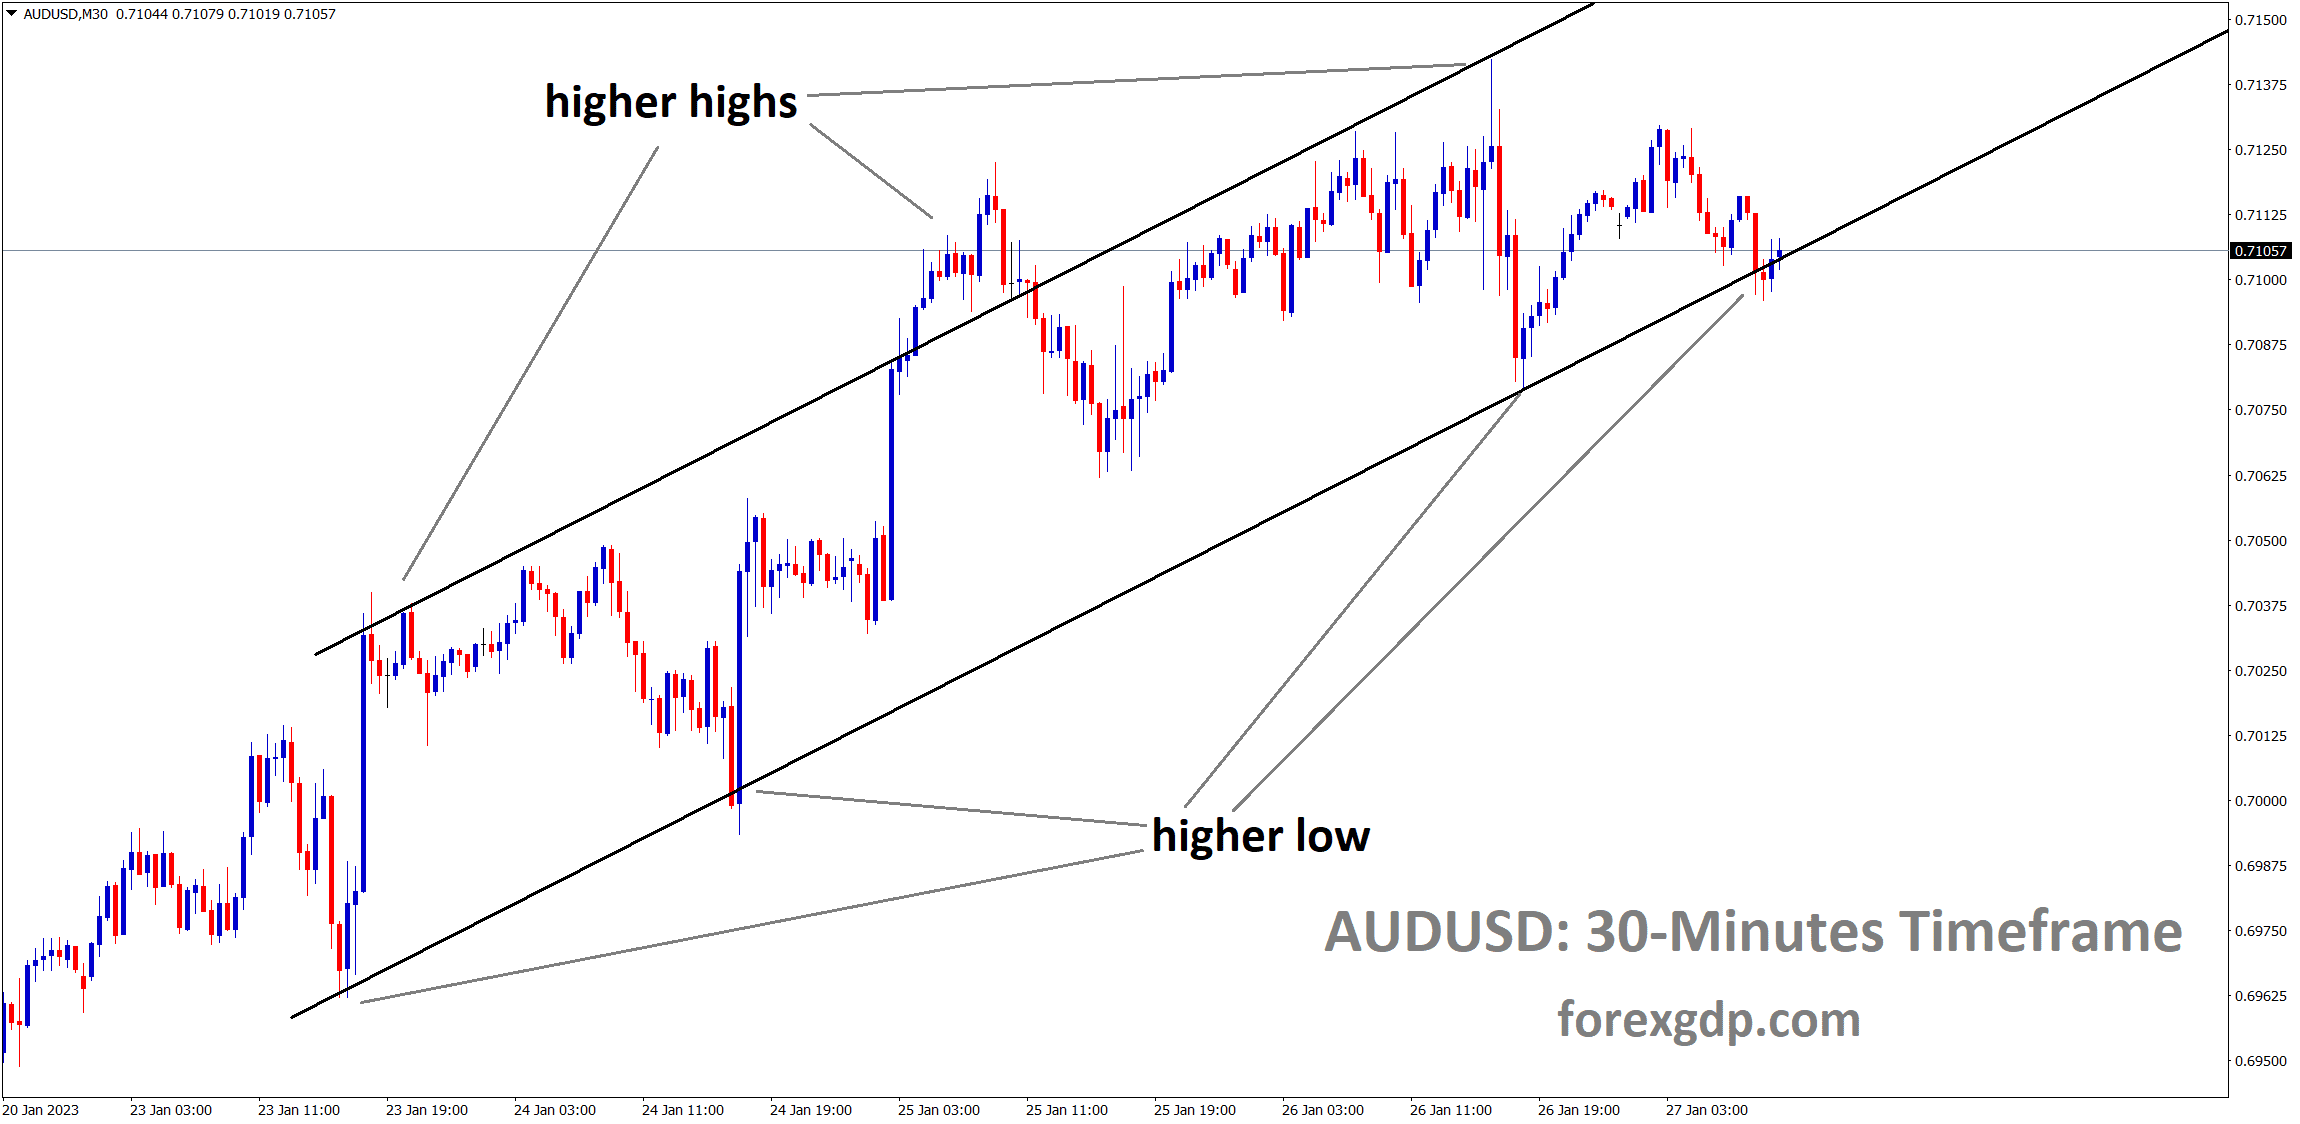 AUDUSD is moving in a Ascending channel and the market has reached the higher low area of the channel.